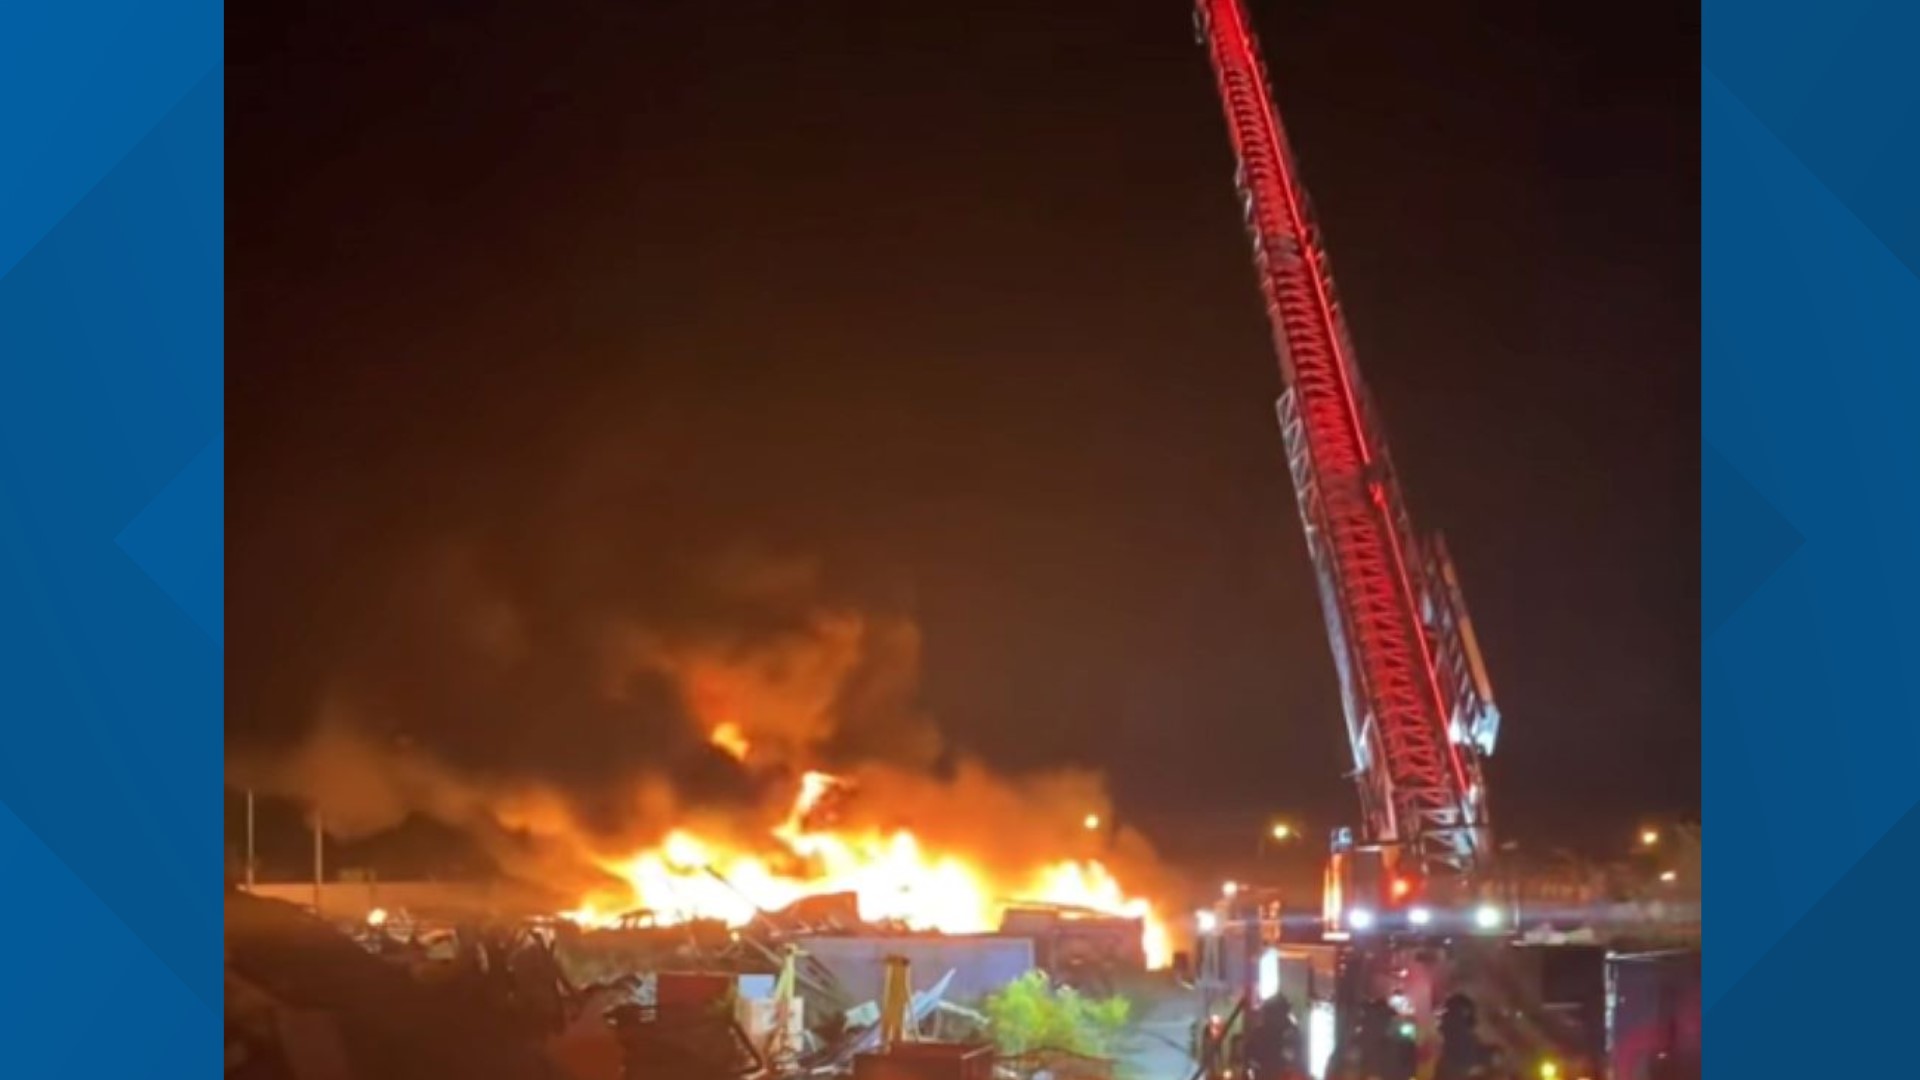 In a social media post, the fire department said multiple tankers were operating at a scrap yard at Zore's on Frontage Road.